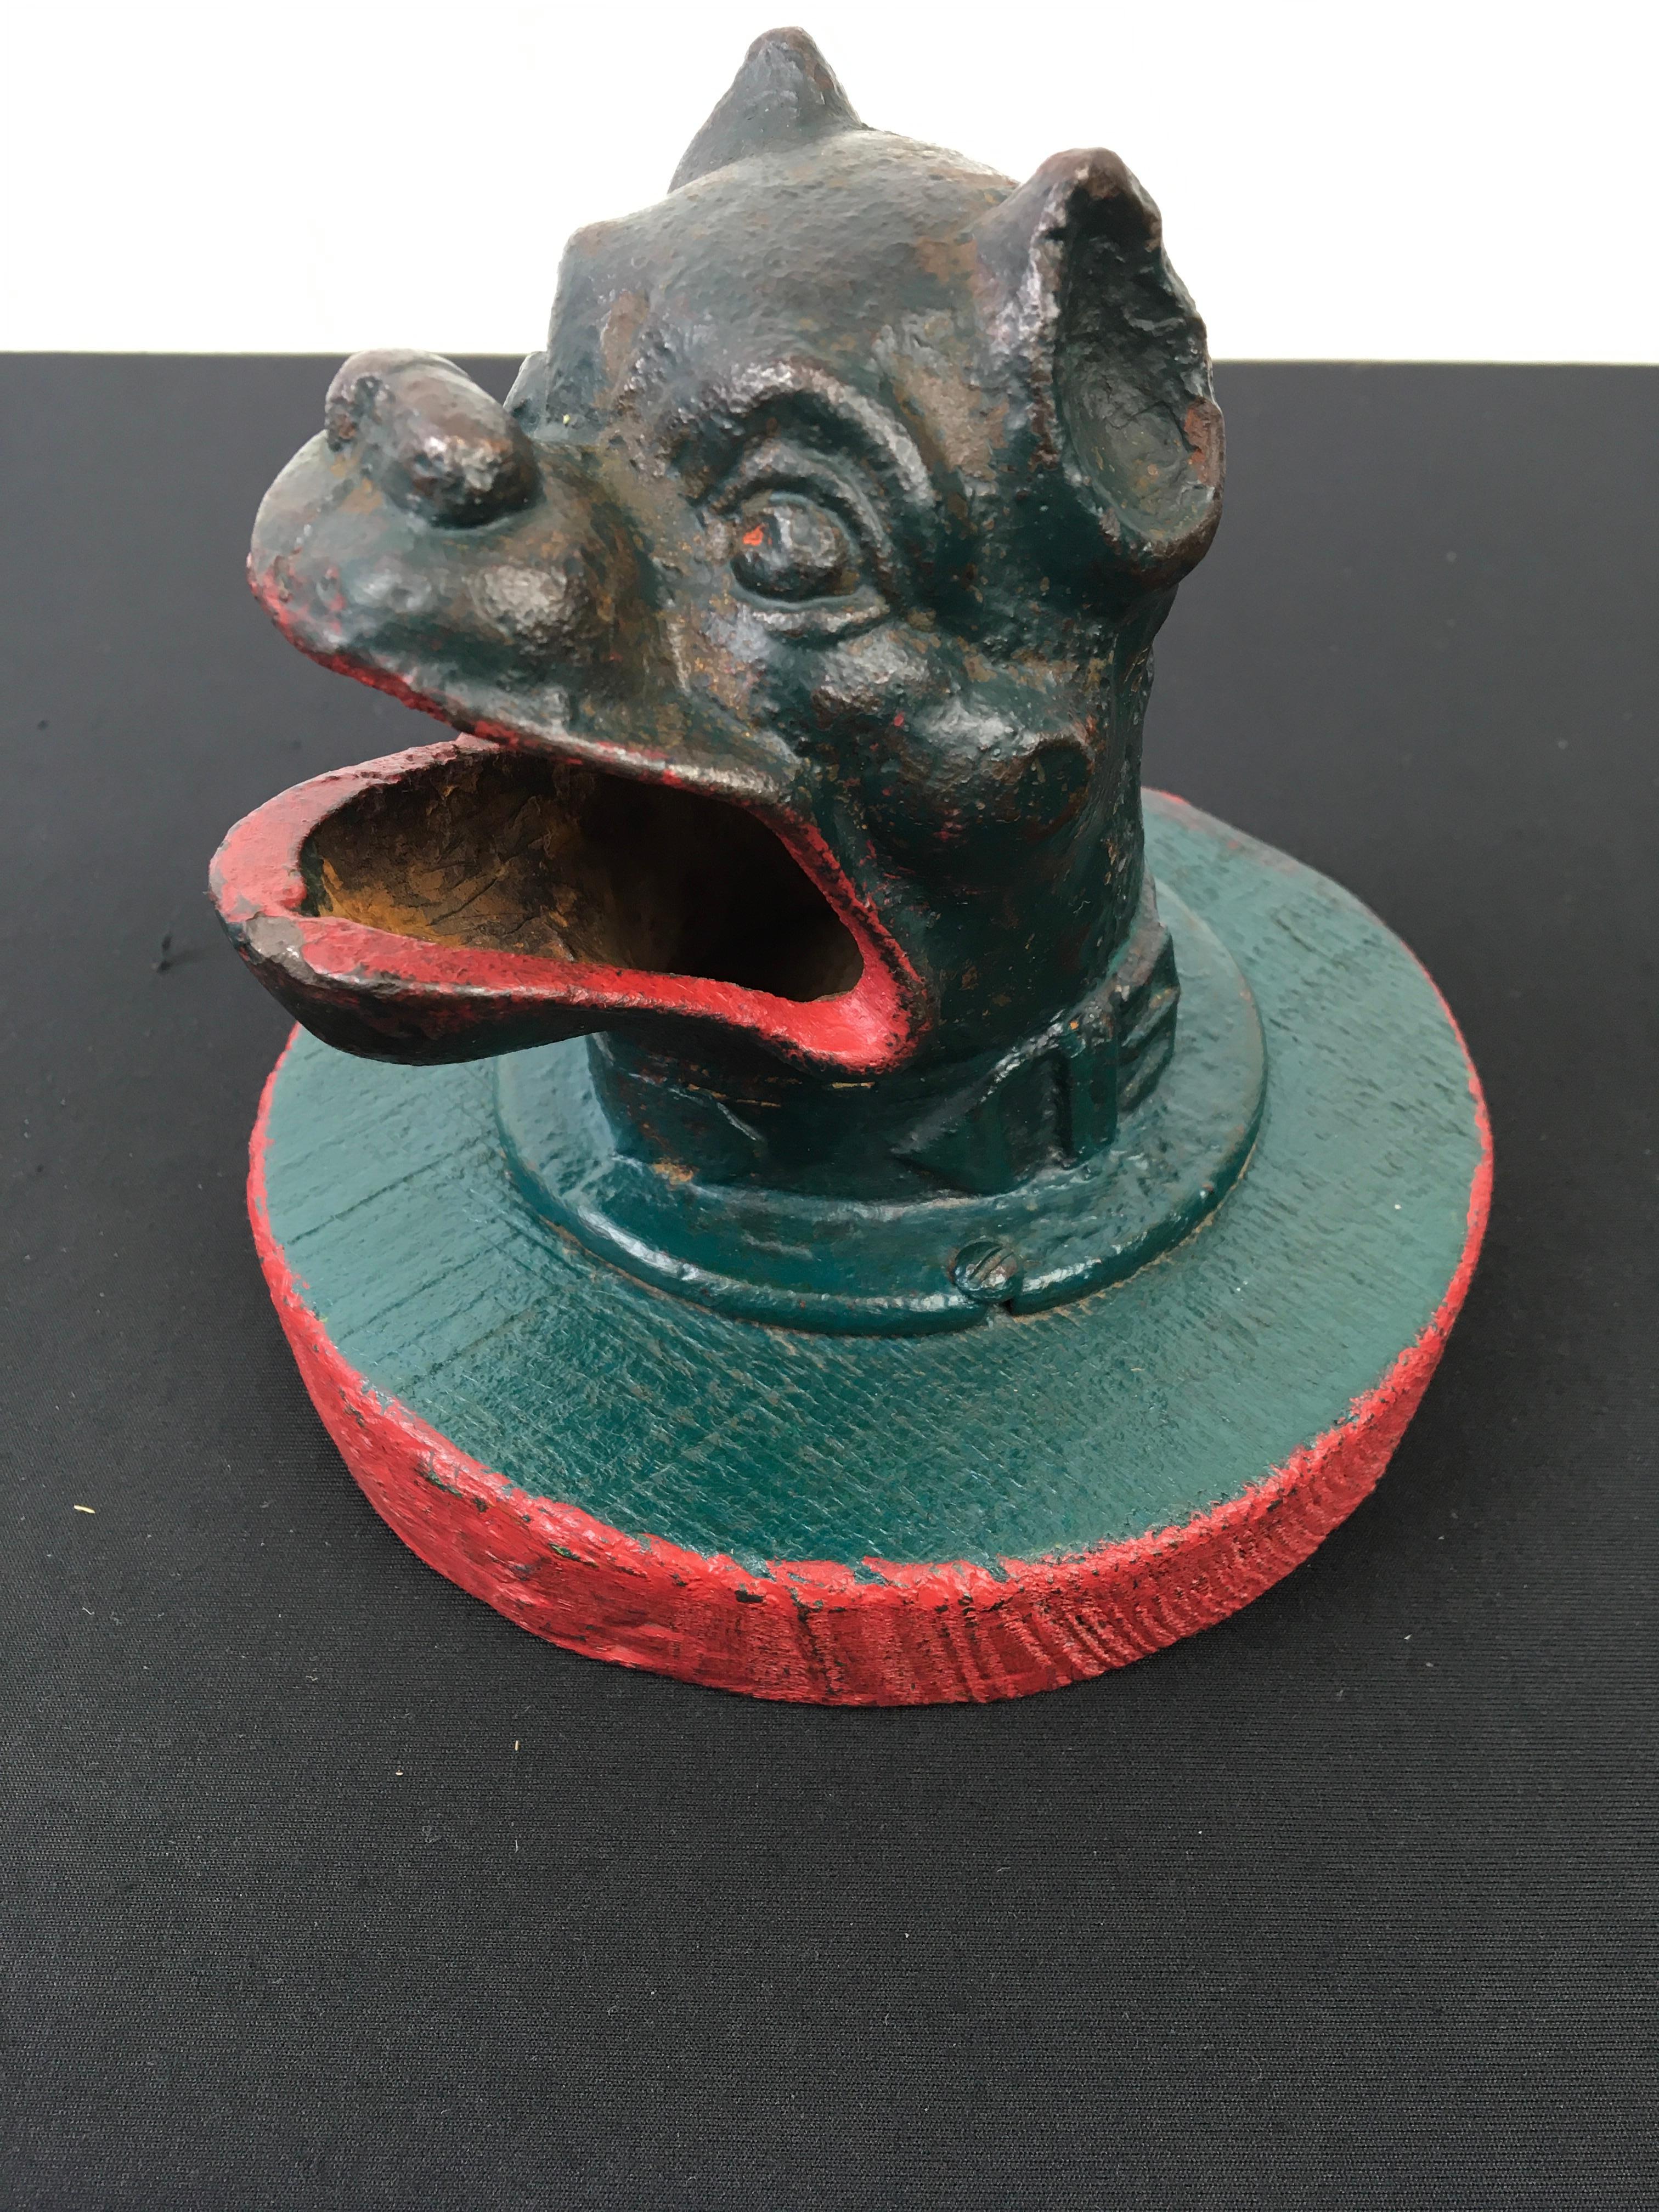 French Bulldog head from an antique coin throwing game - coin toss game.
This French antique game is known as frog game - jeu de la grenouille. 
The intention was to throw coins or jetons in the mouth of the bulldog dog.  
Most of these antique